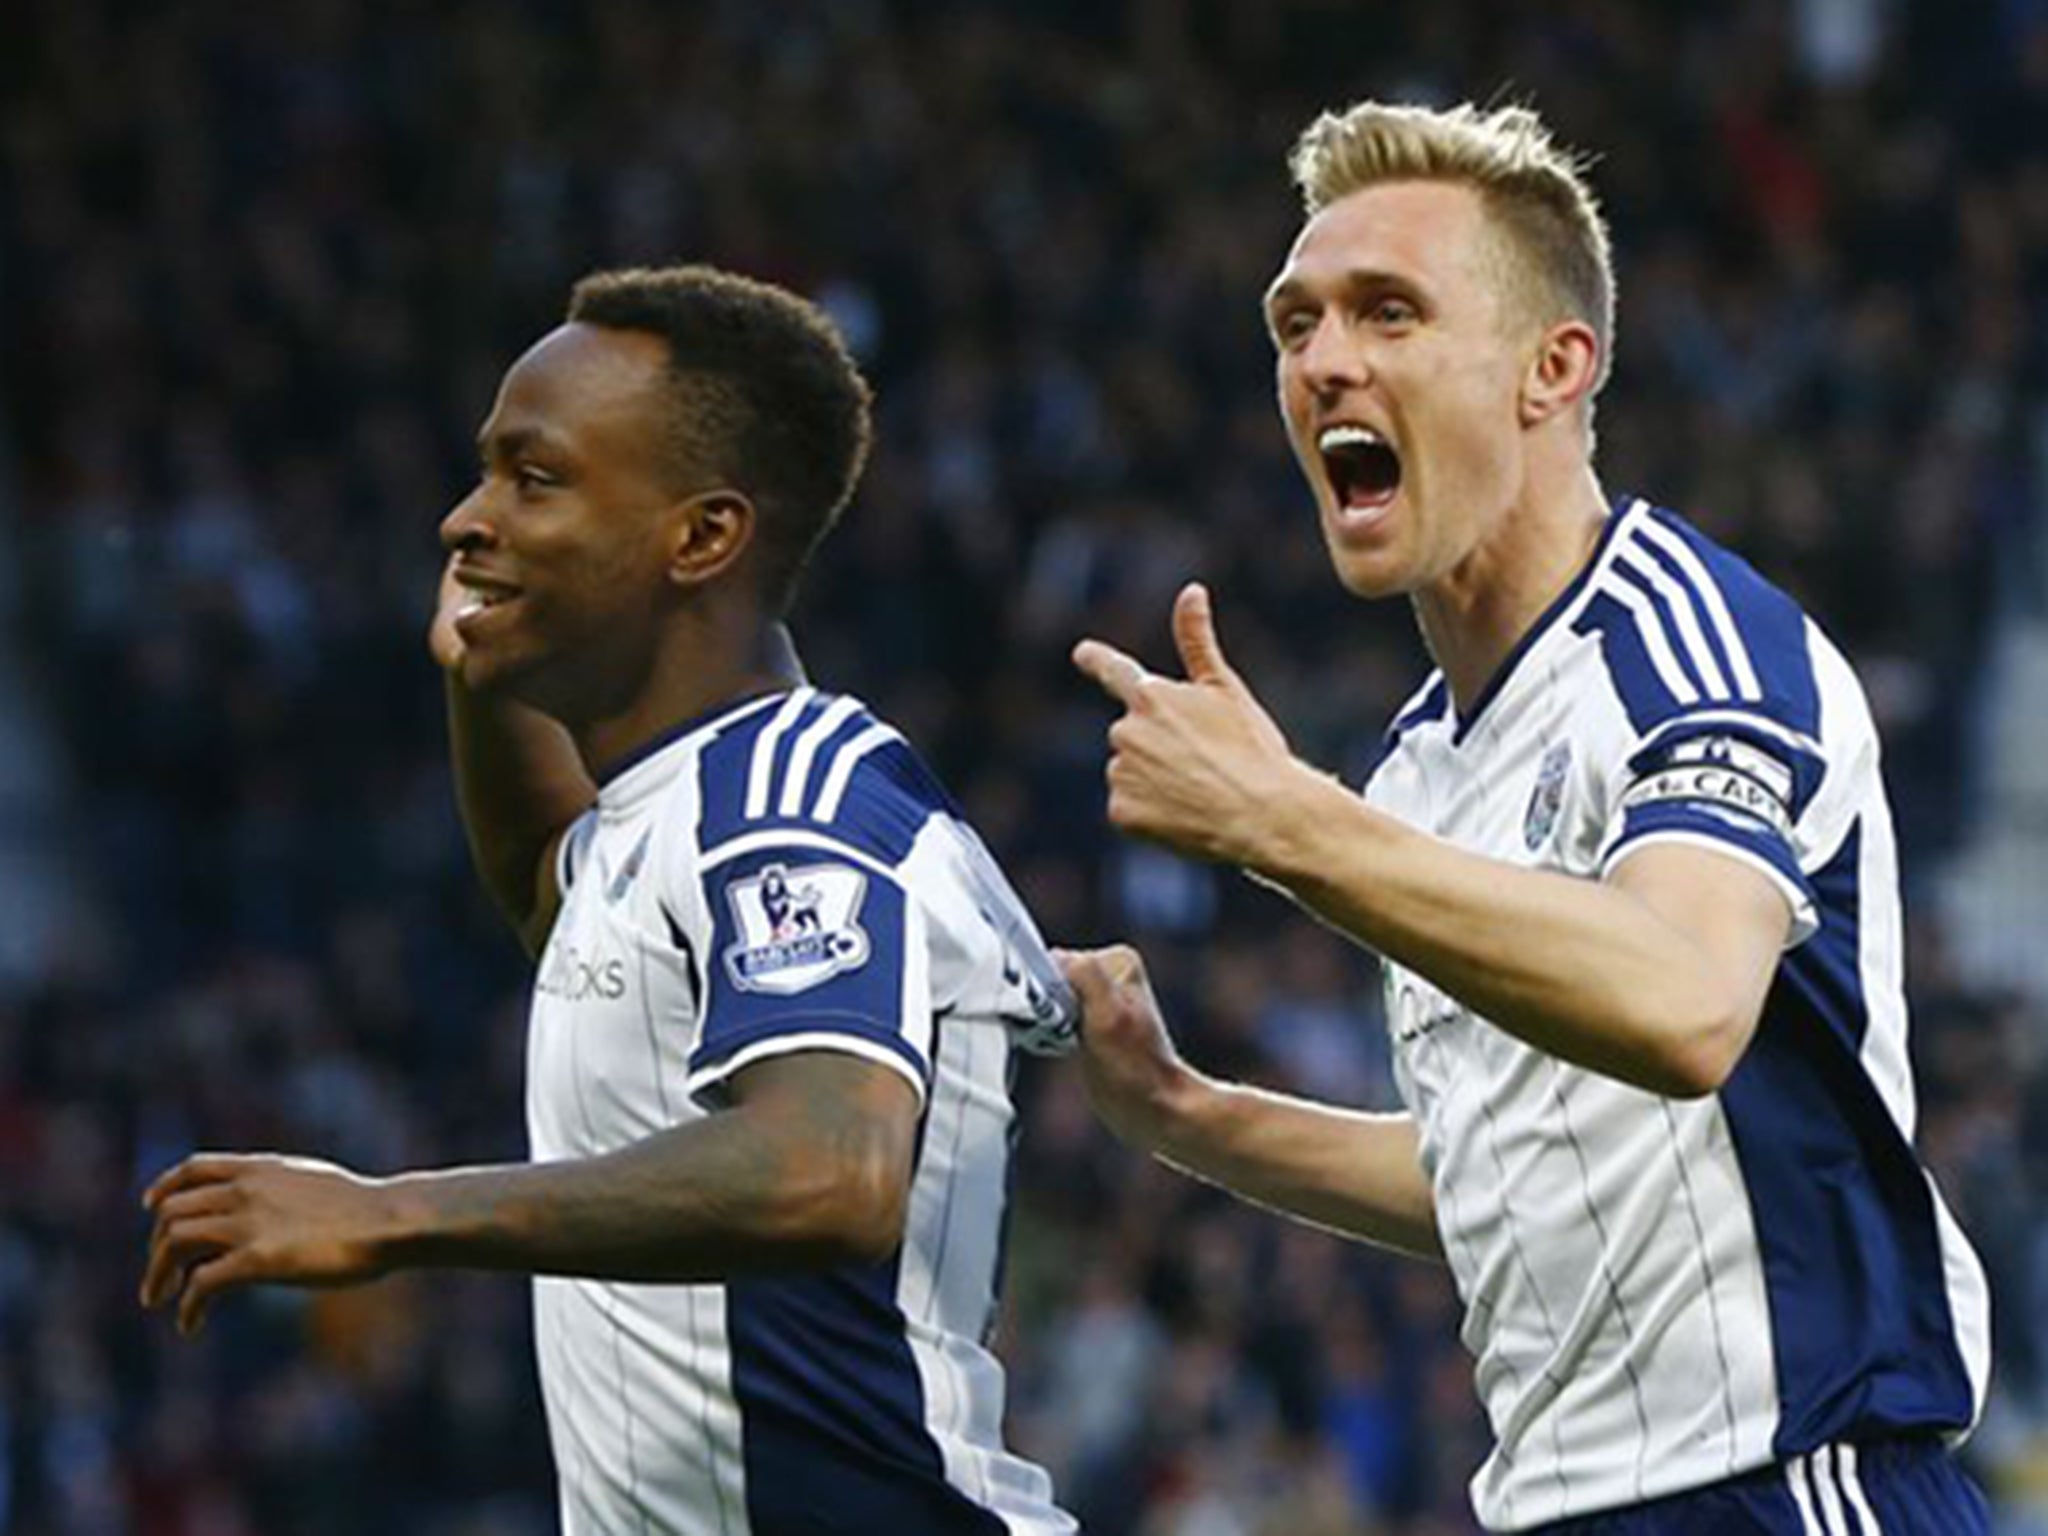 West Bromwich’s captain, Darren Fletcher, right, leads the applause for Saido Berahino’s opening goal against Chelsea